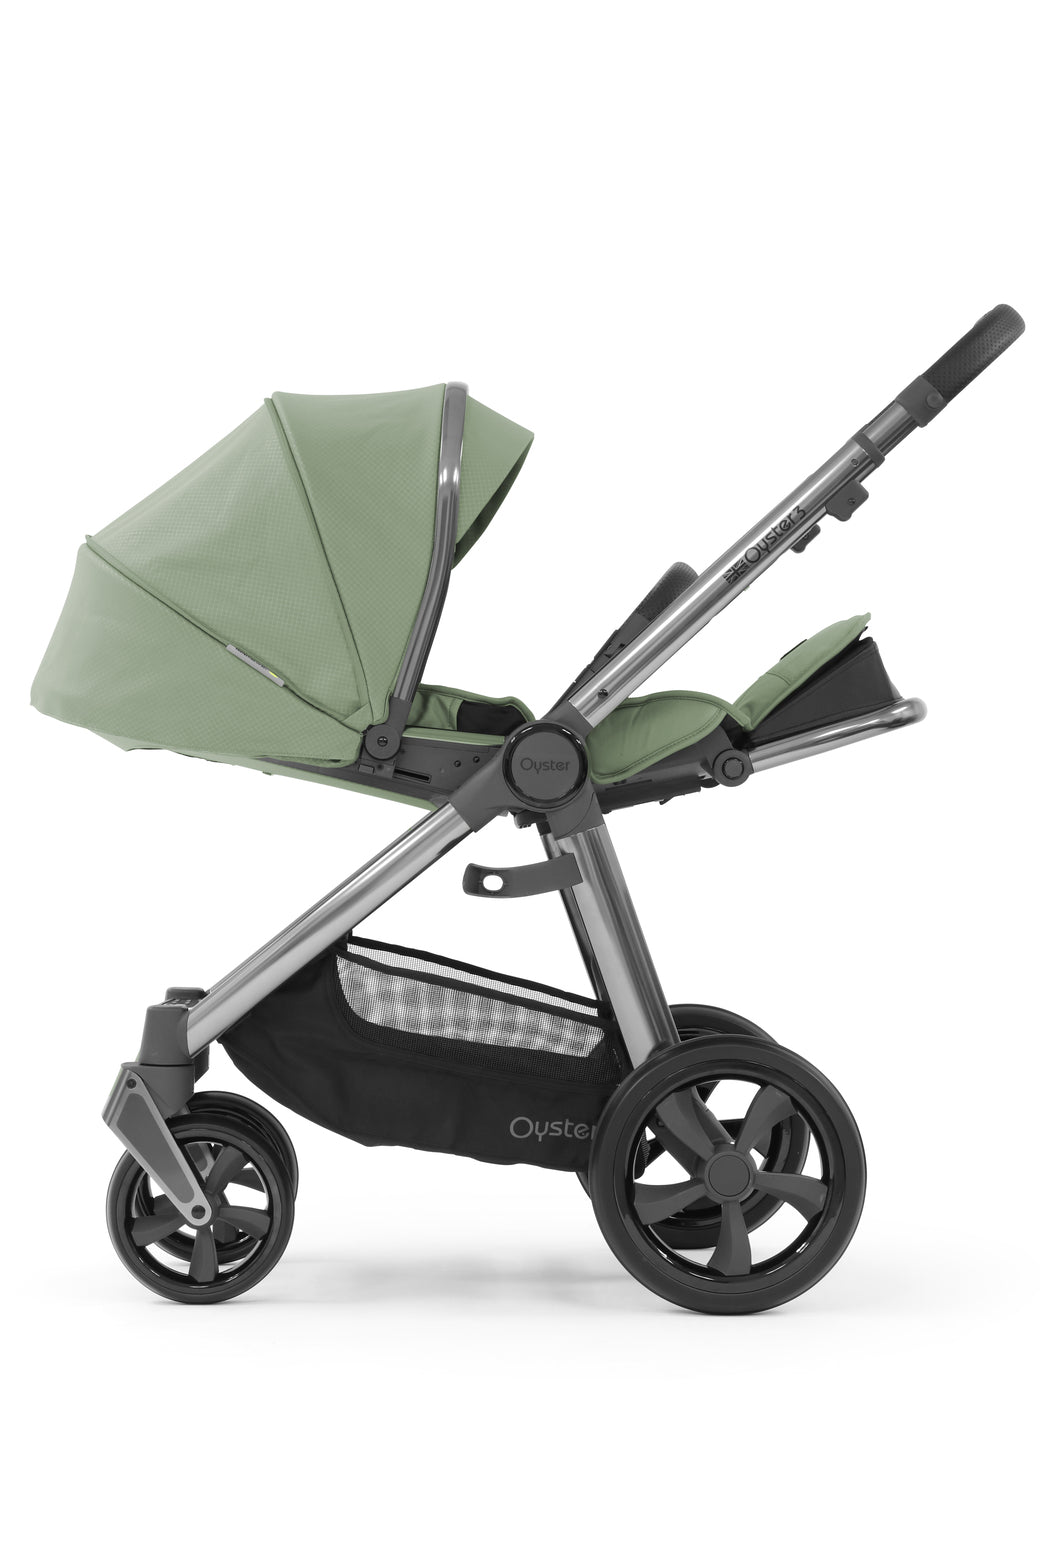 Babystyle Oyster 3 Essential 5 Piece Travel System Bundle With Cloud T - Spearmint - For Your Little One